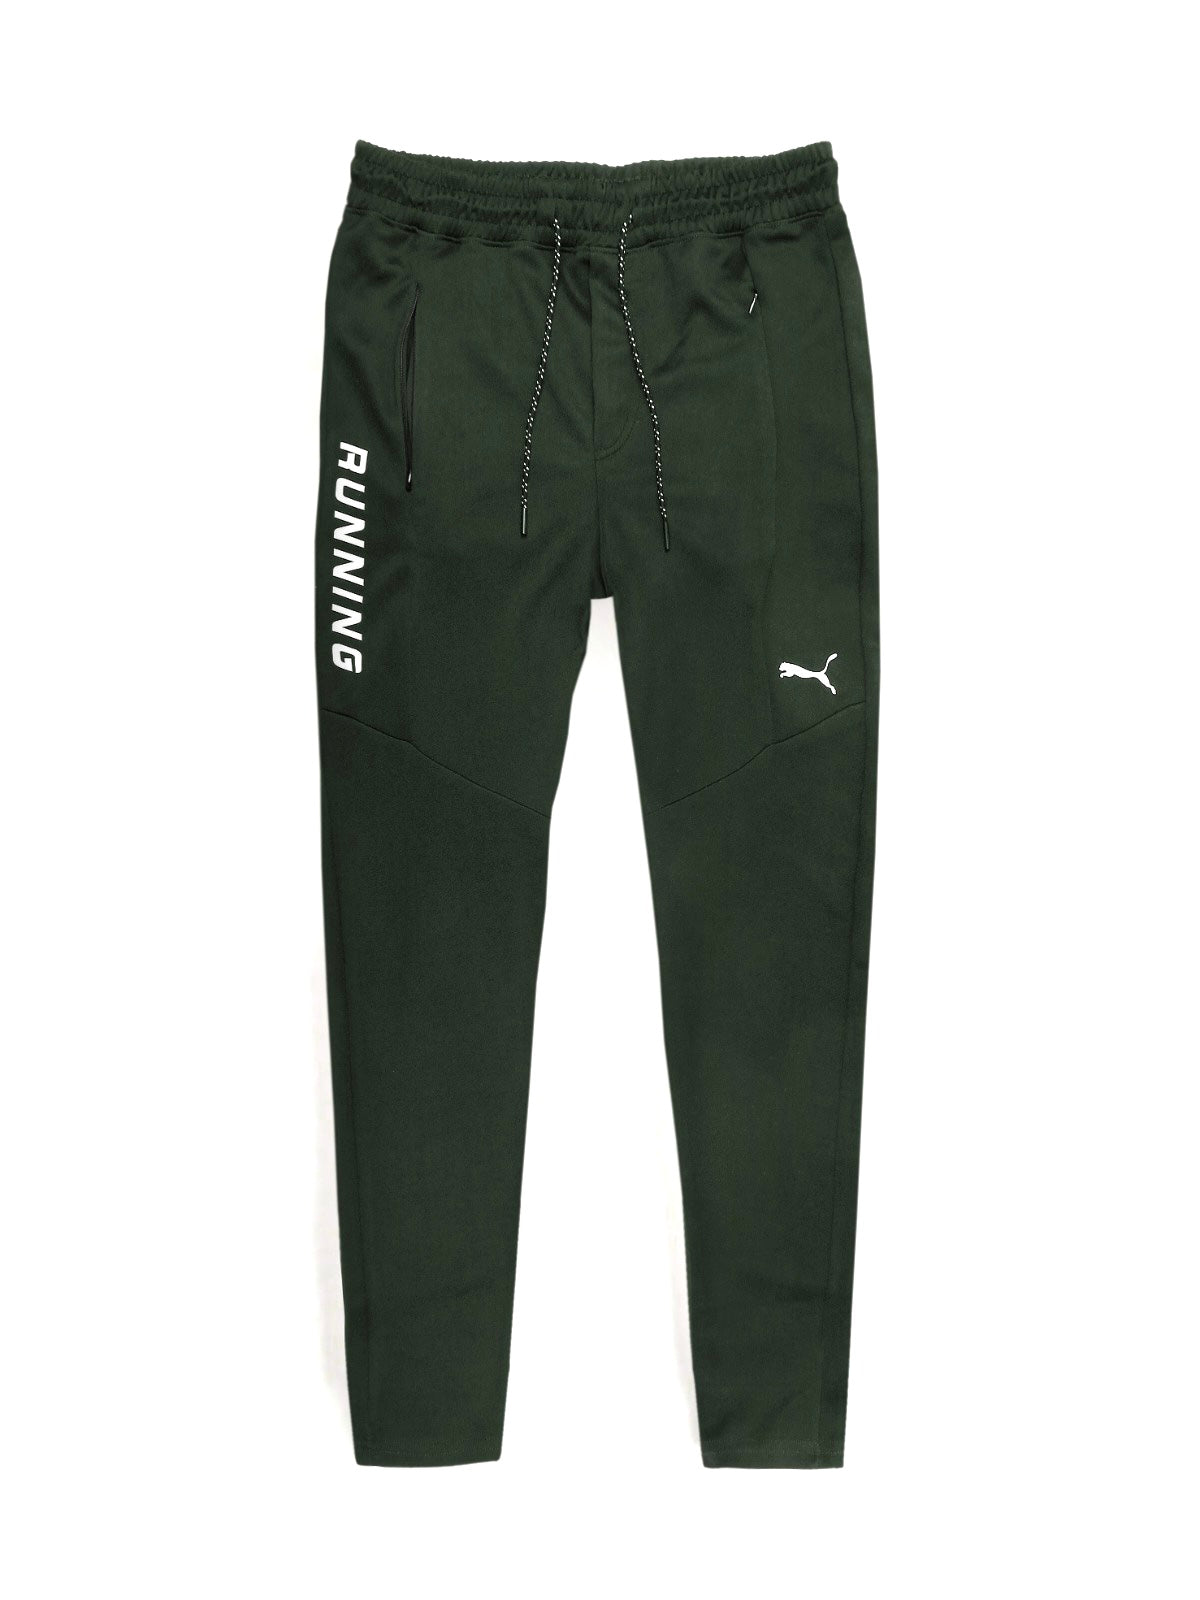 PMA active wear green ankle fit trouser (00308)